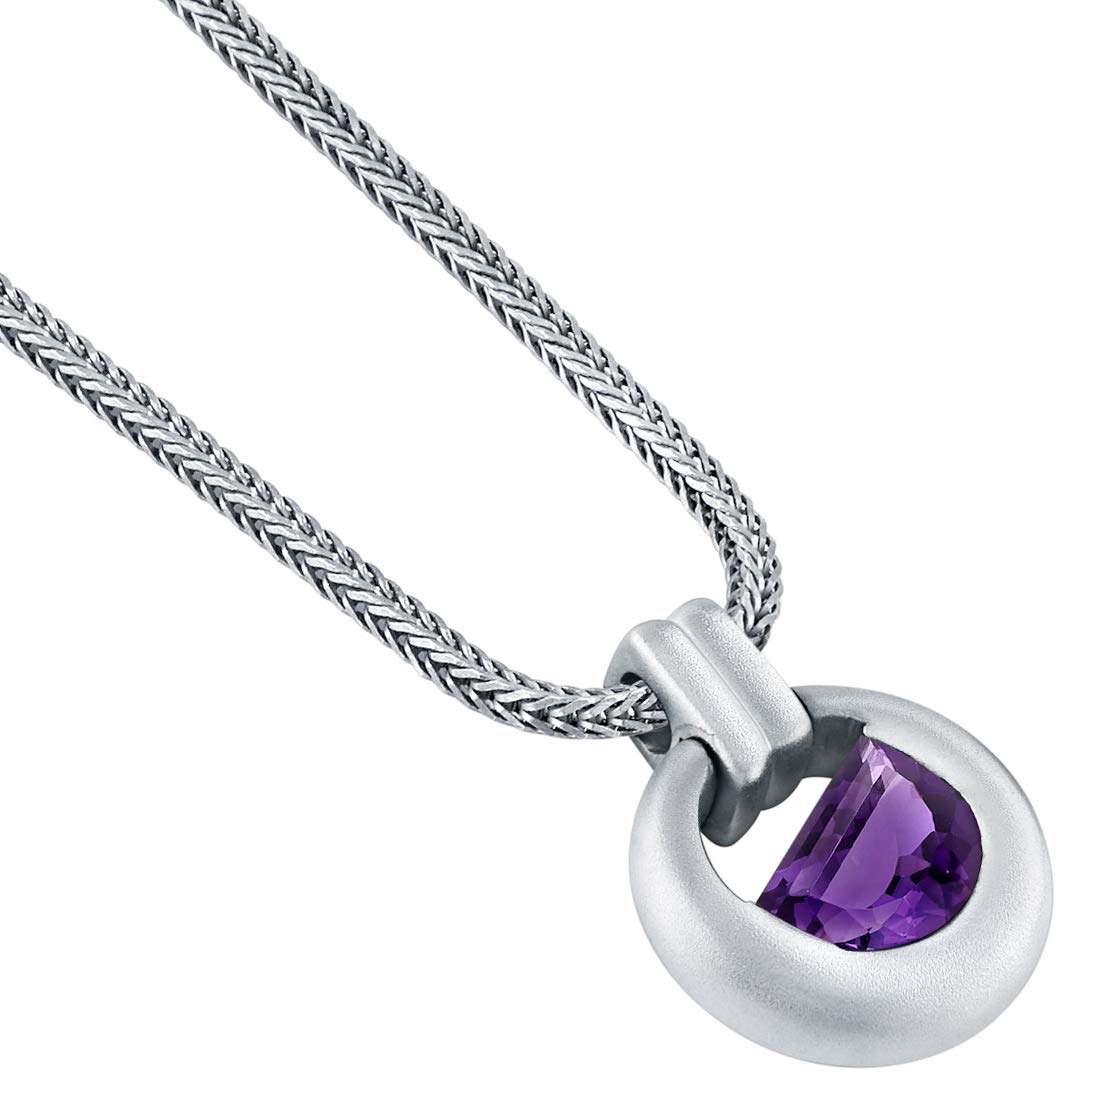 Peora Amethyst Amulet Pendant Necklace for Men in Sterling Silver, 3 Carats Half Moon Shape, Brushed Finished, with 22-Inch Italian Chain